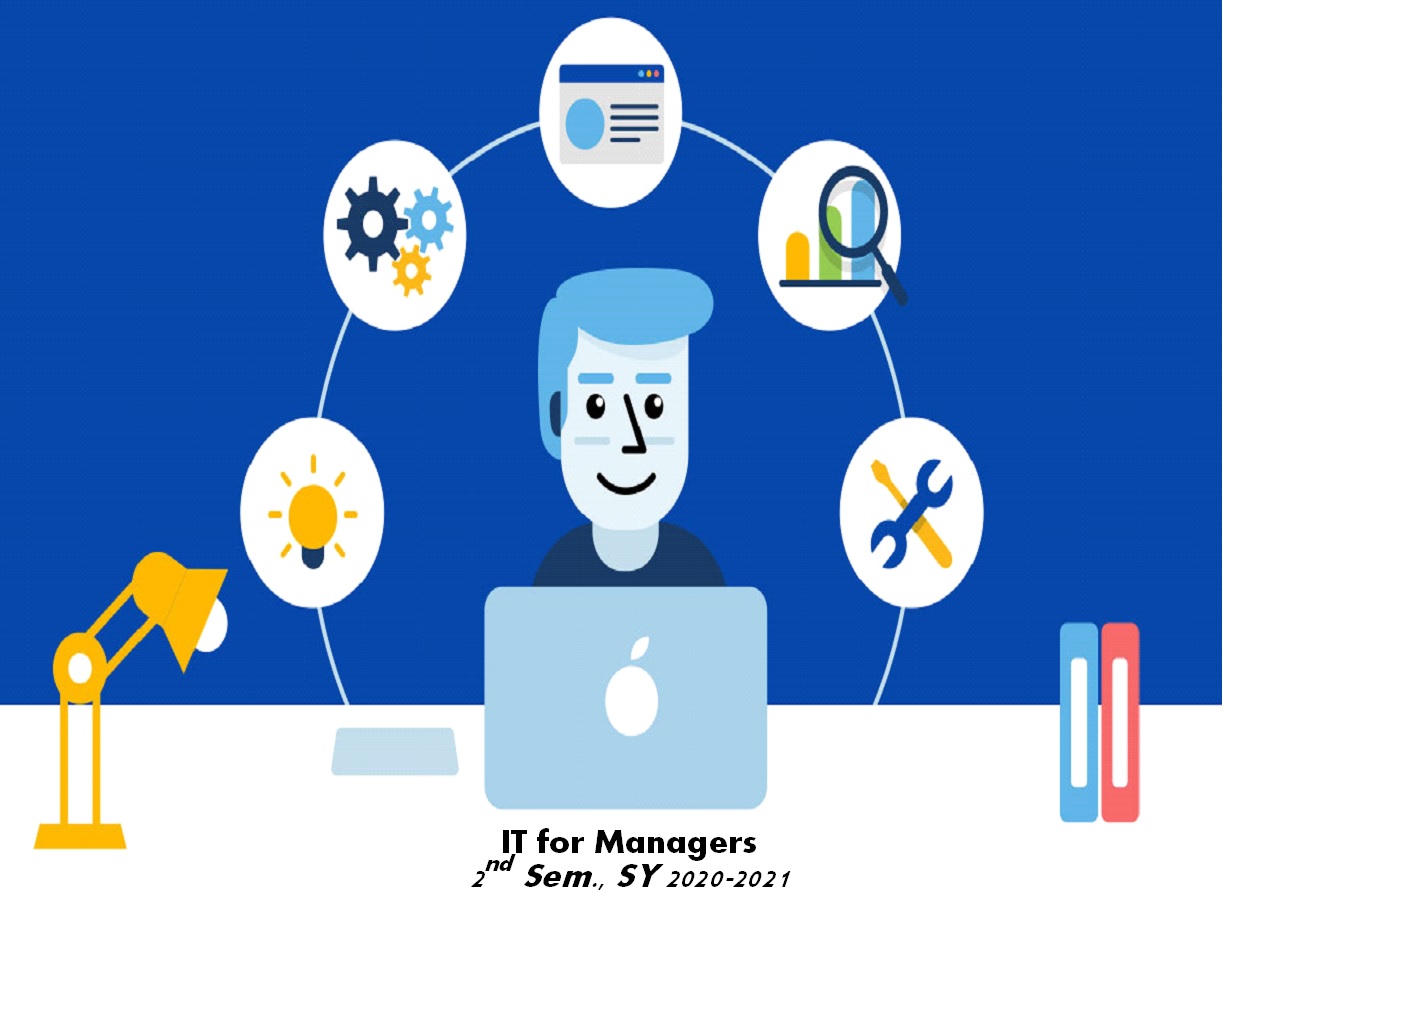 IT for Managers